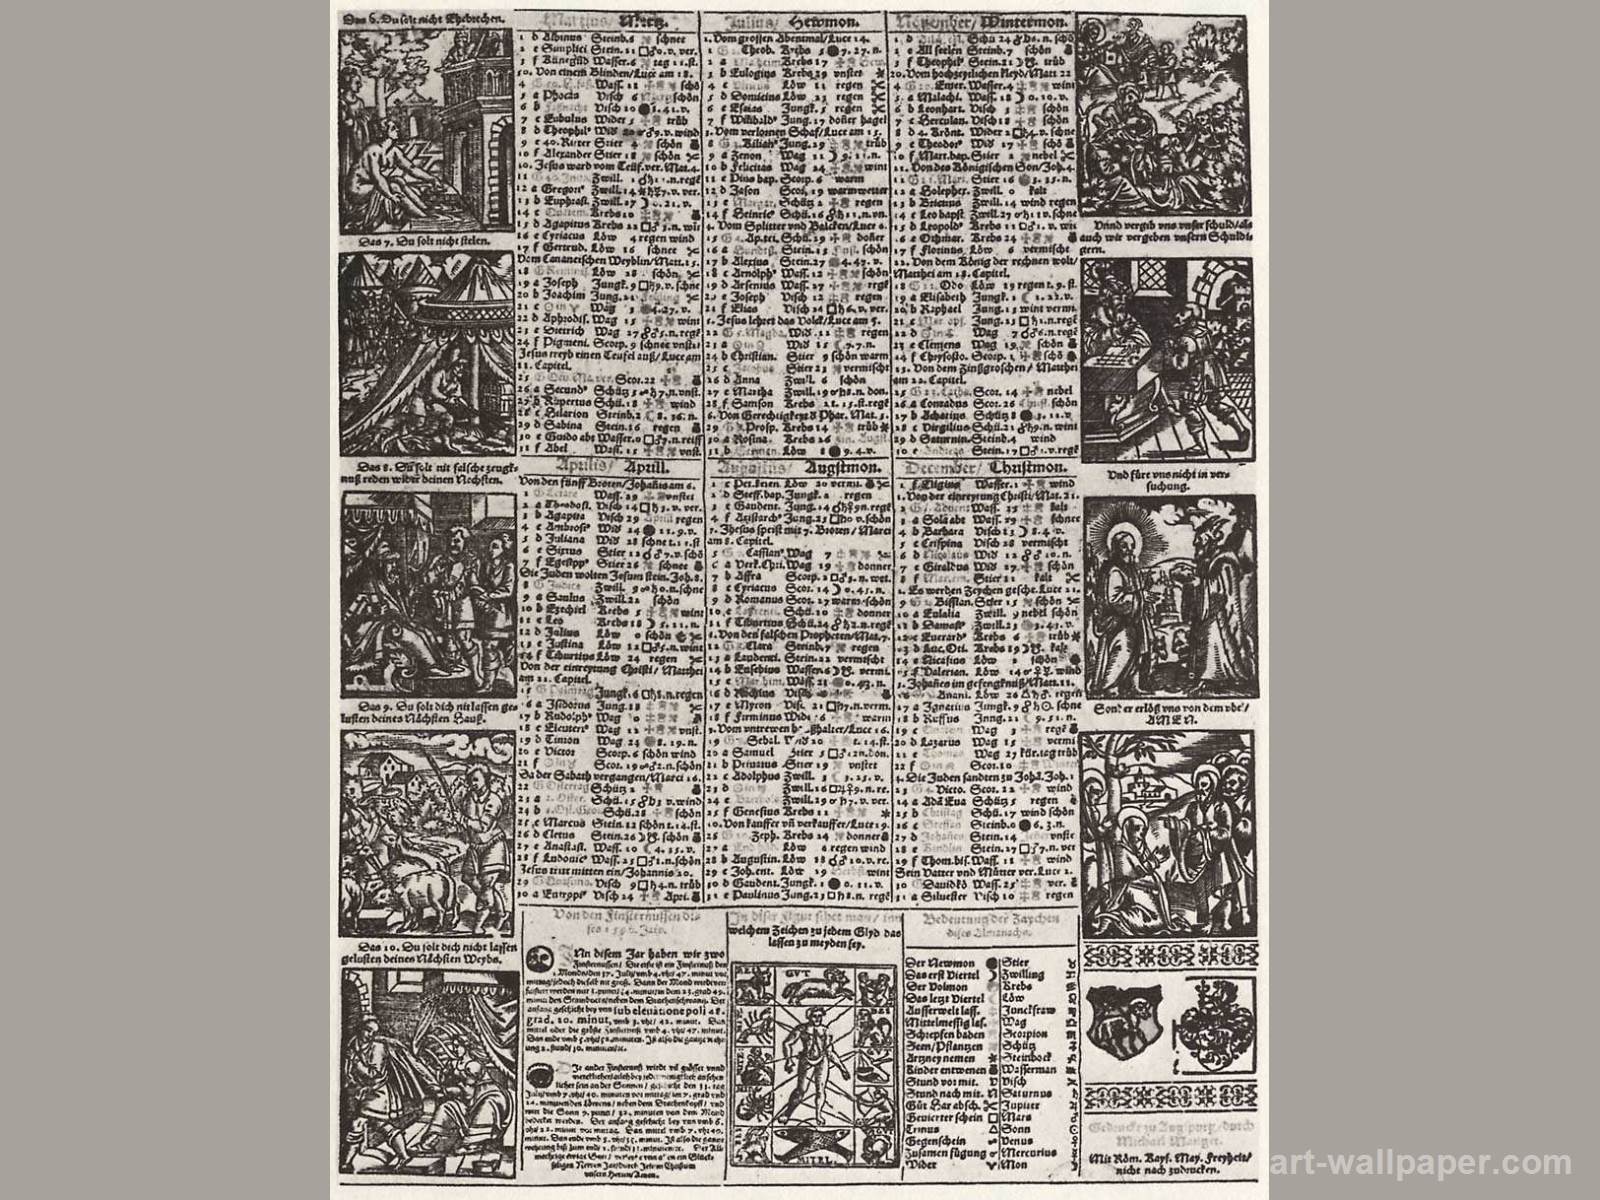 Calendar of the year 1590 with the Ten Commandments and the Lord&;s